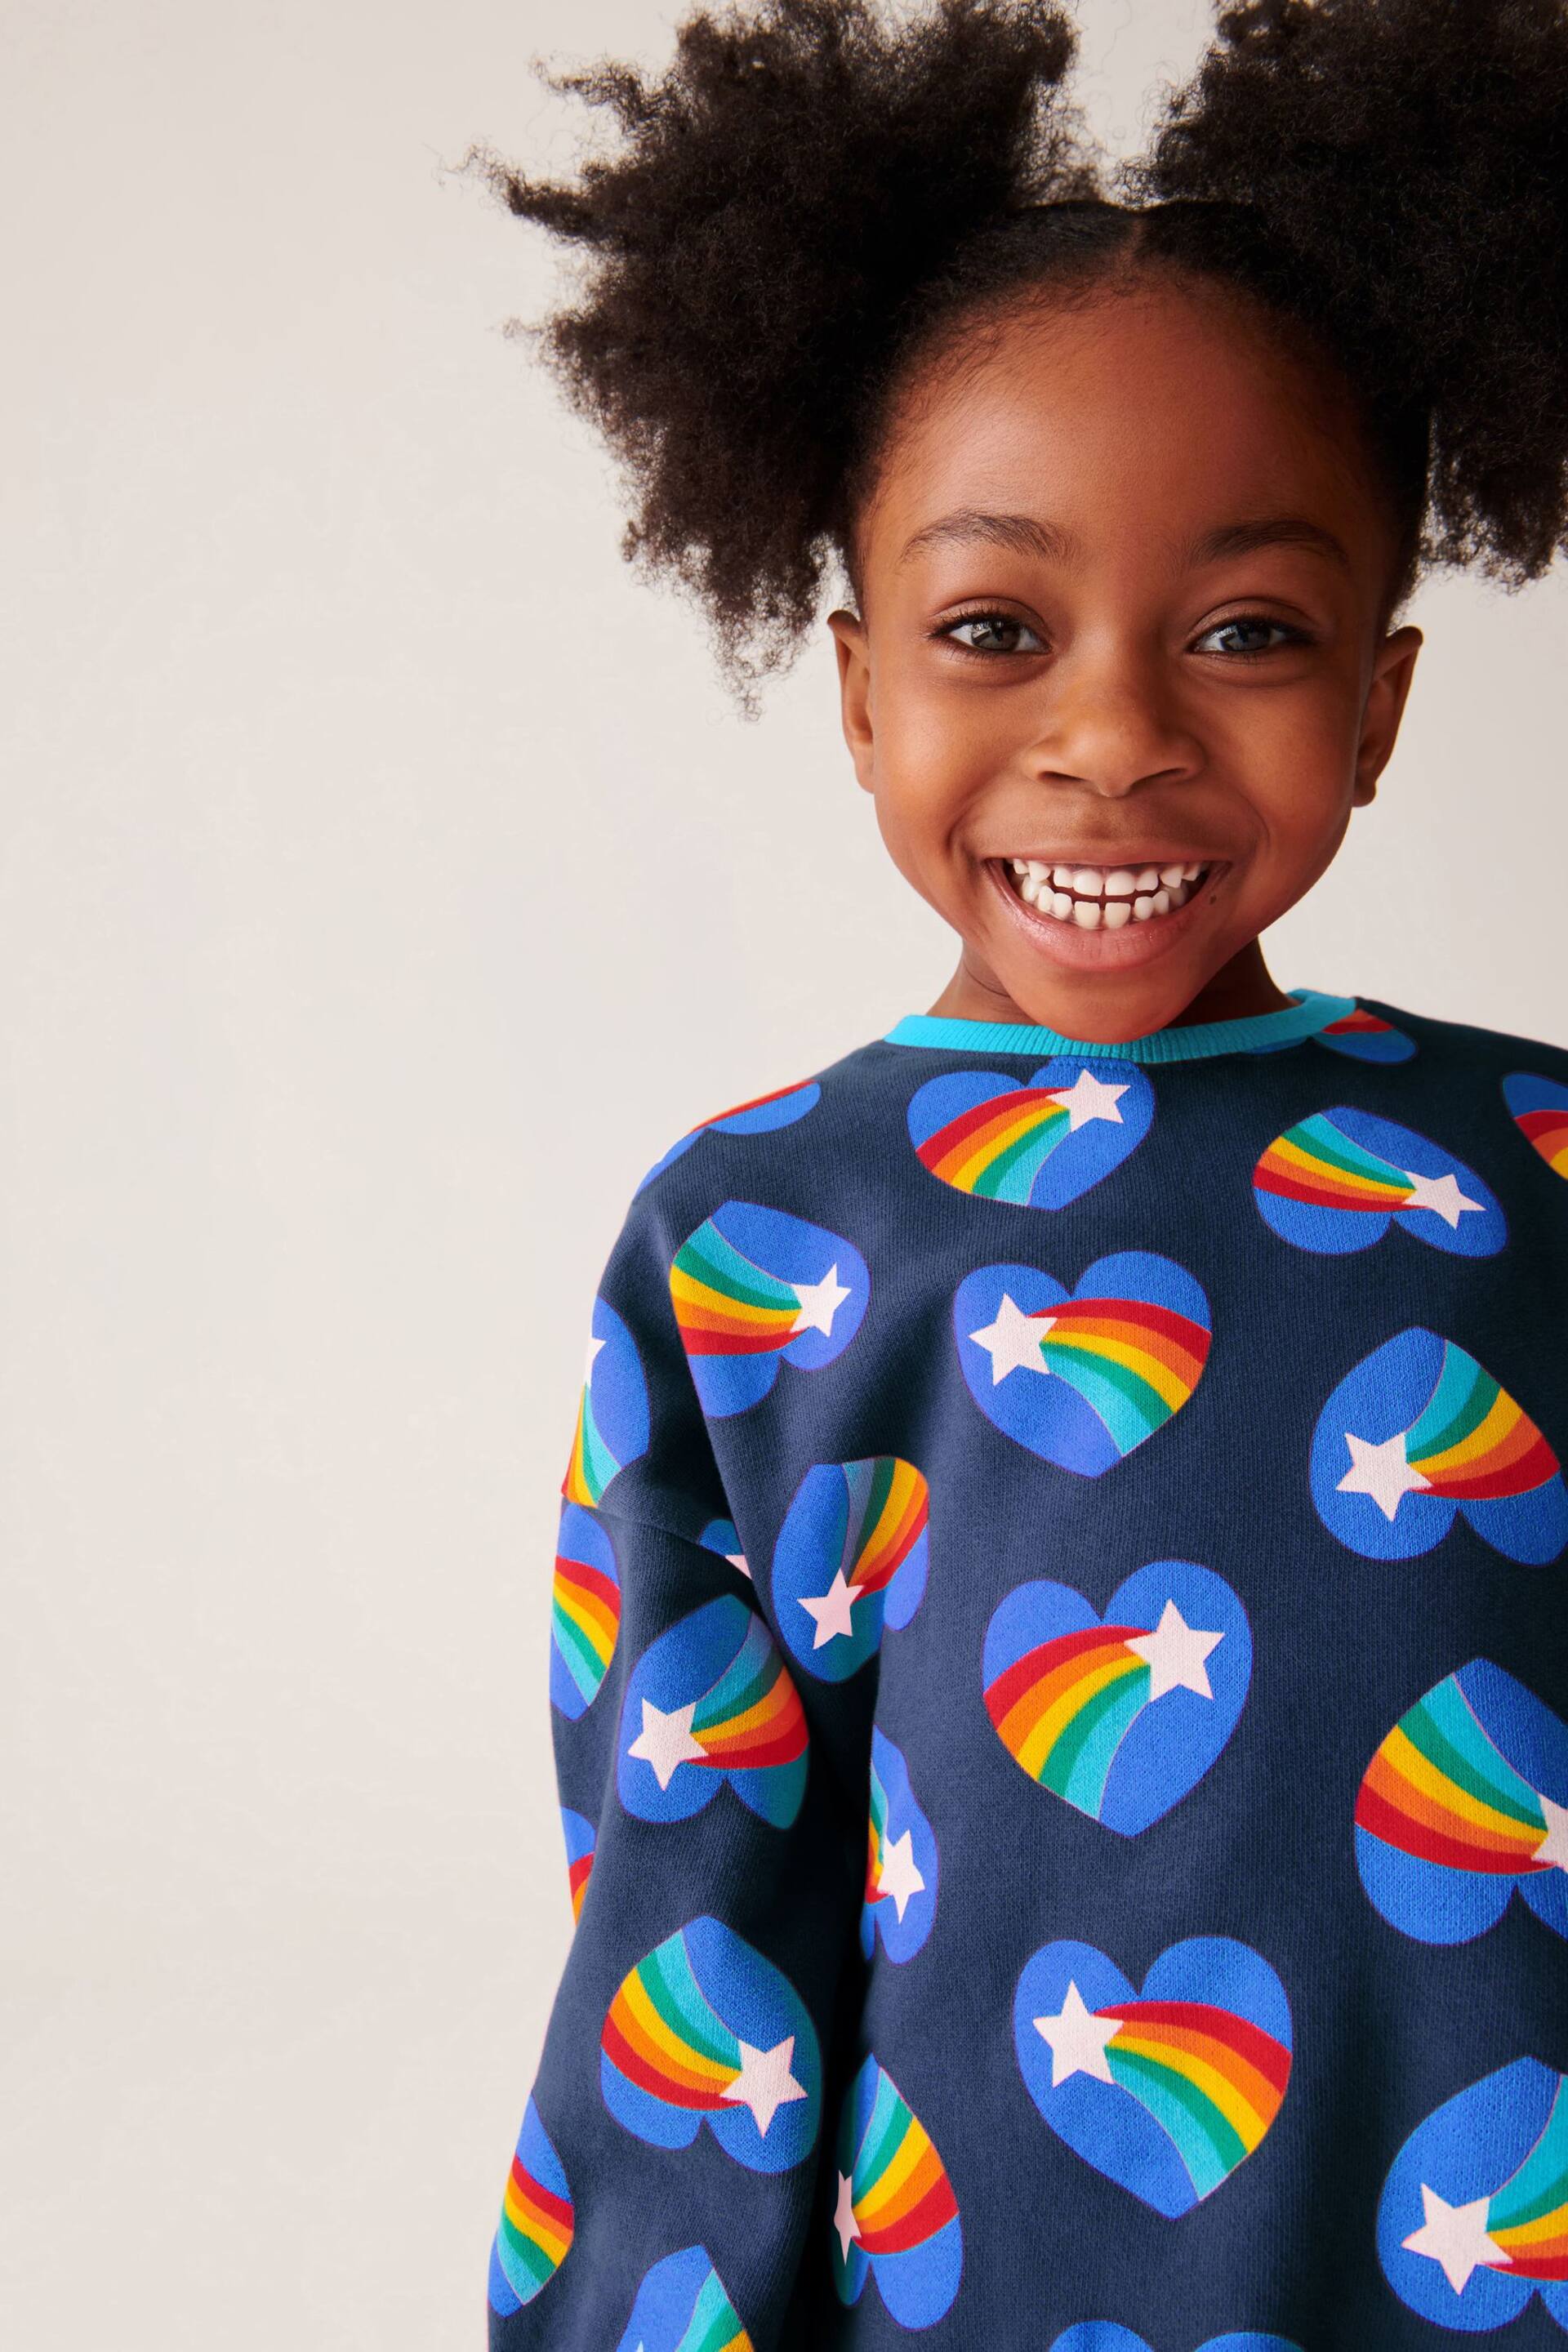 Little Bird by Jools Oliver Blue Rainbow Heart Sweat Top and Short Set - Image 3 of 7